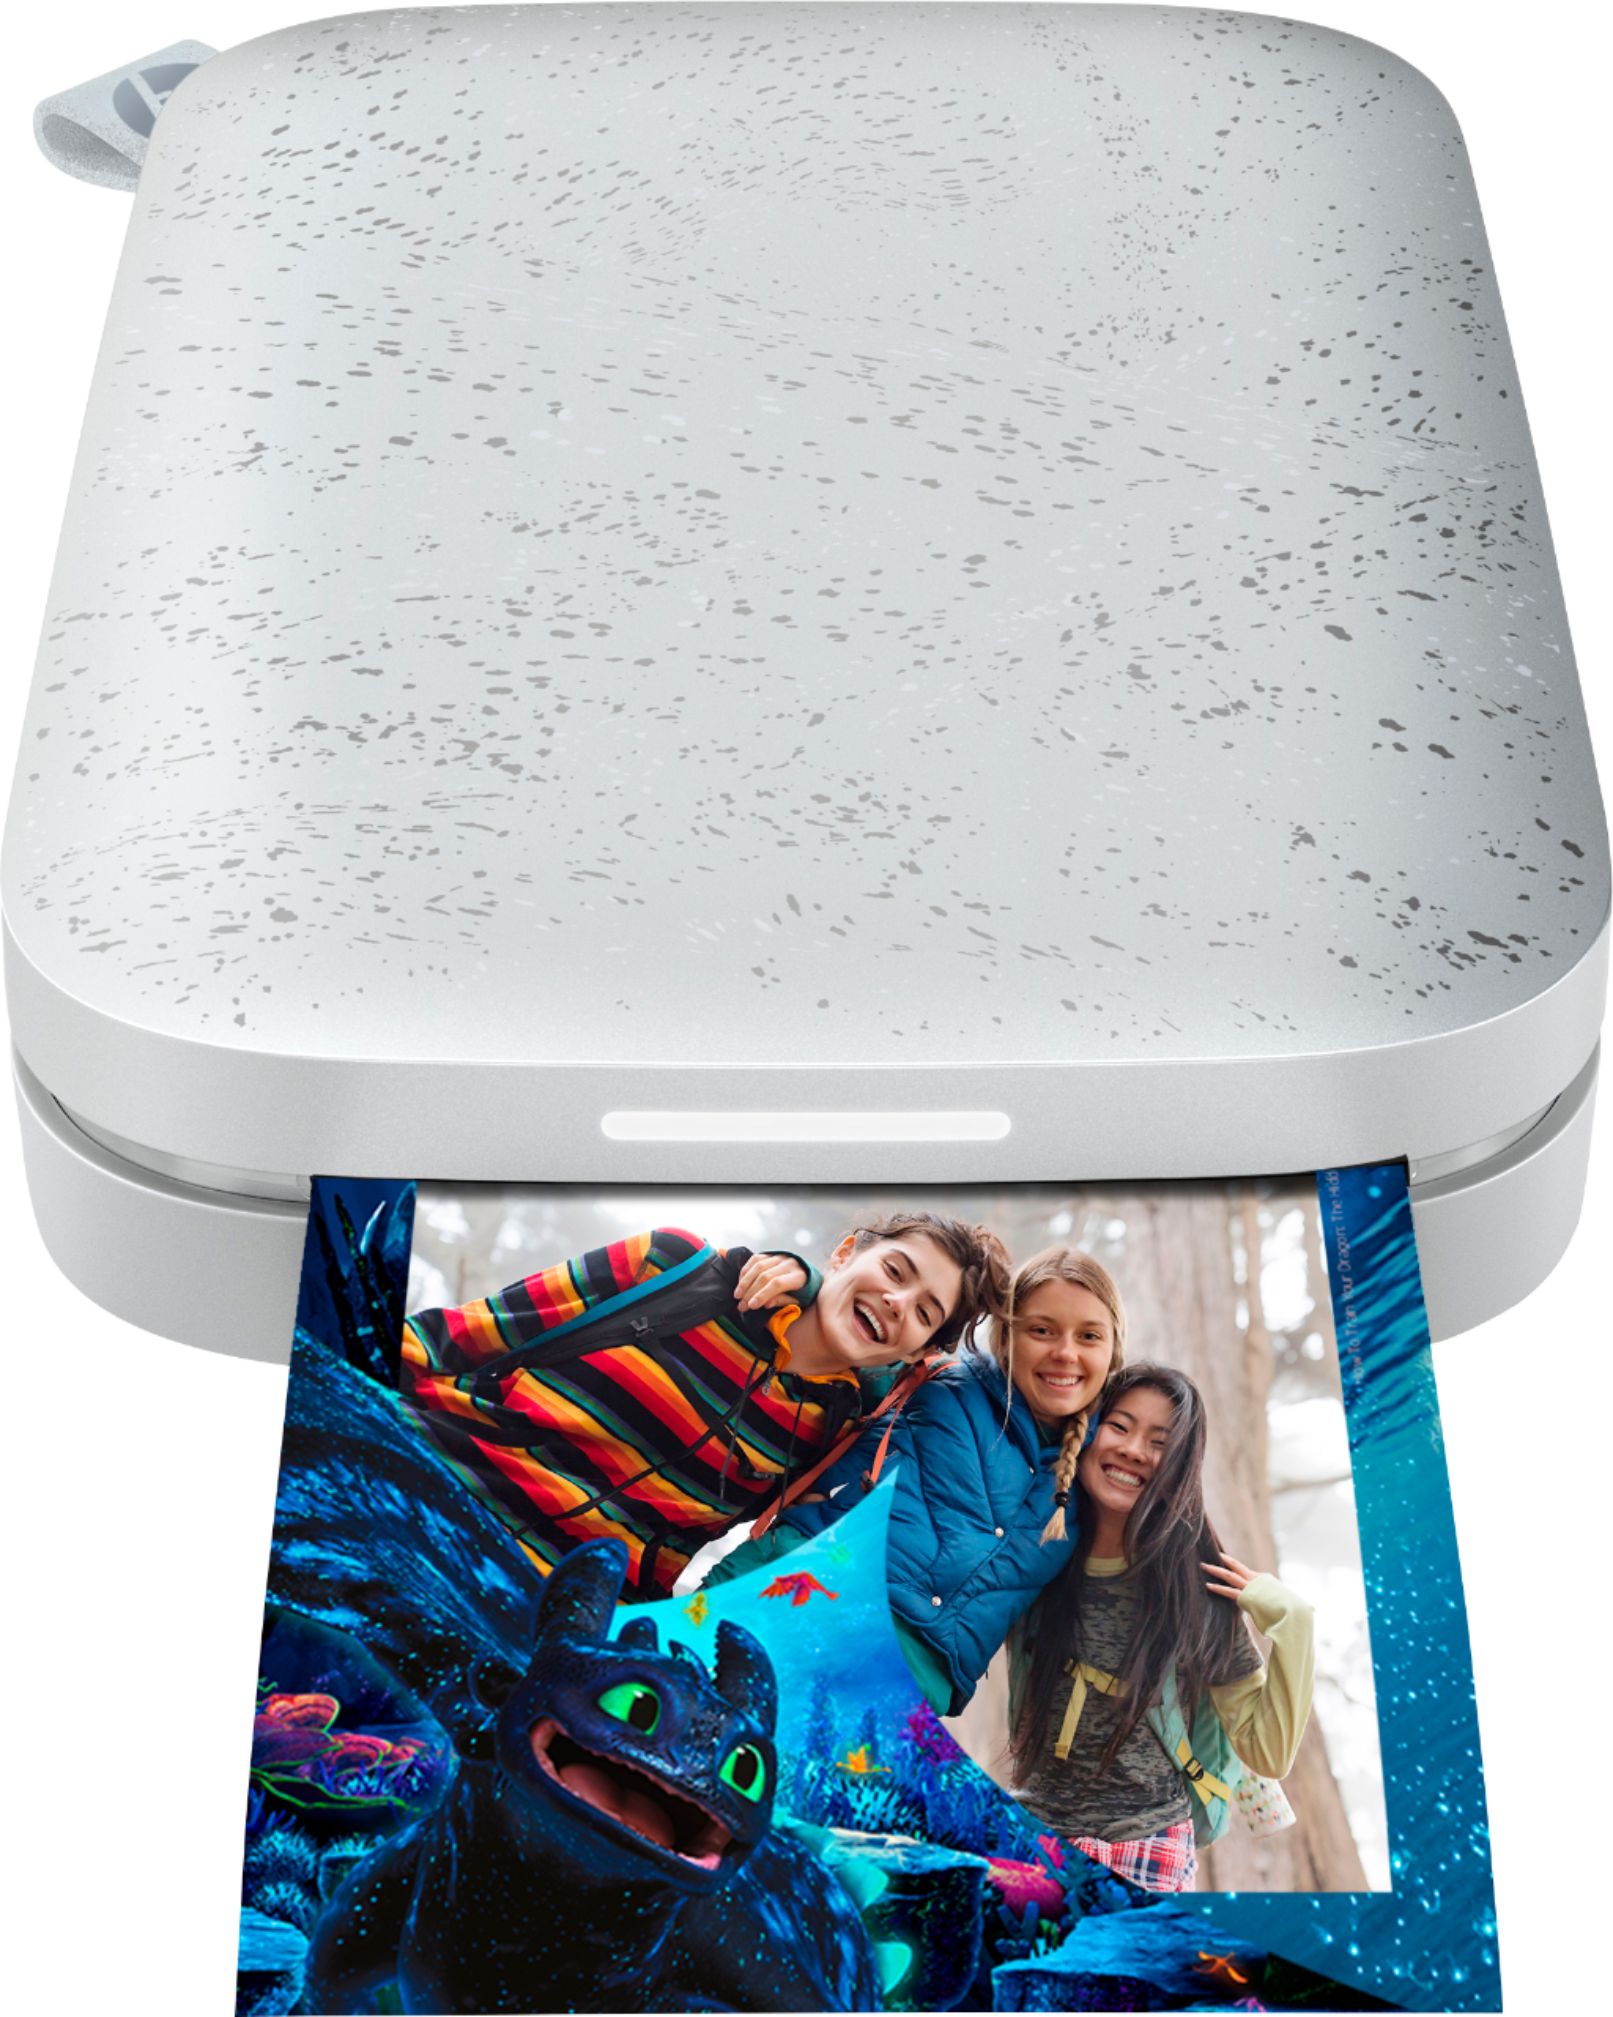 HP Sprocket 2nd Edition Instant Photo Printer Noir 1AS86A#B1H - Best Buy